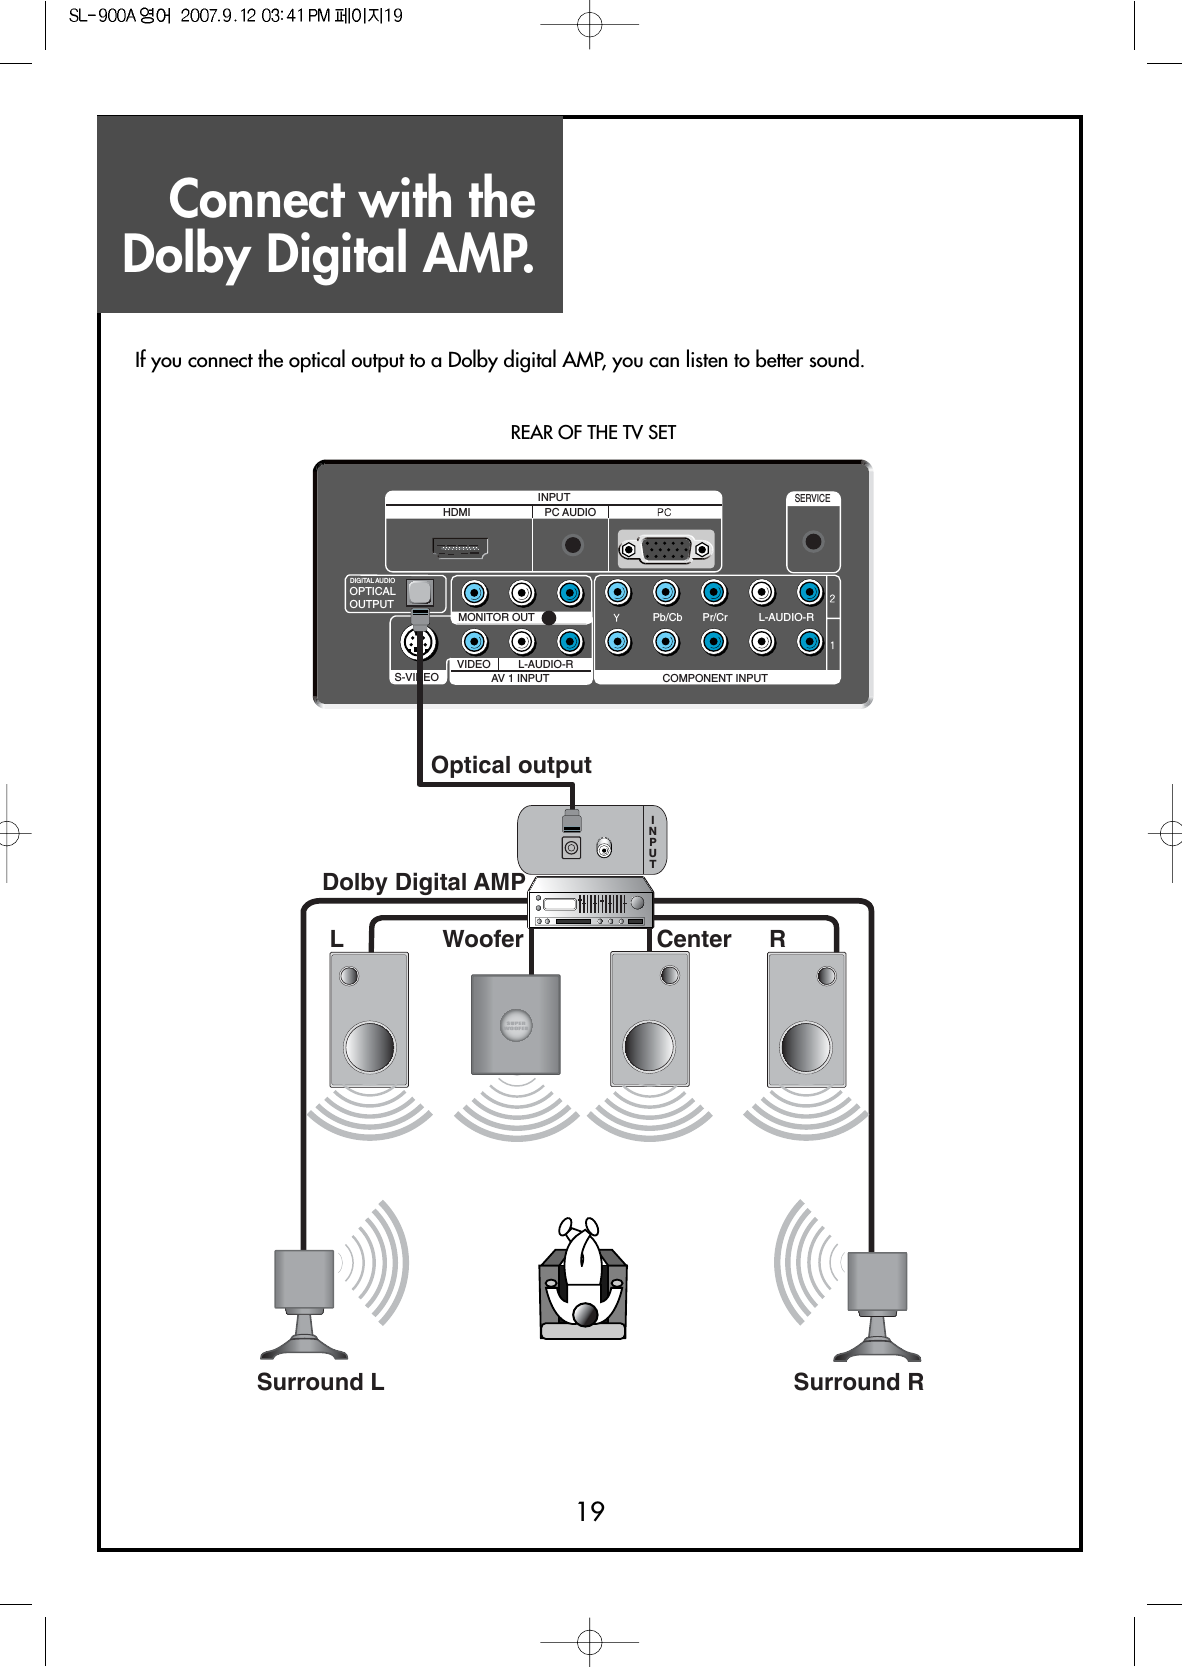 Connect with theDolby Digital AMP.19S-VIDEO AV 1 INPUT COMPONENT INPUTL-AUDIO-RVIDEO L-AUDIO-RMONITOR OUTOPTICALOUTPUTPC AUDIOHDMIINPUTSERVICEPb/Cb Pr/CrDIGITAL AUDIOSurround L Surround RRL CenterWooferDolby Digital AMPINPUTOptical outputIf you connect the optical output to a Dolby digital AMP, you can listen to better sound.REAR OF THE TV SET